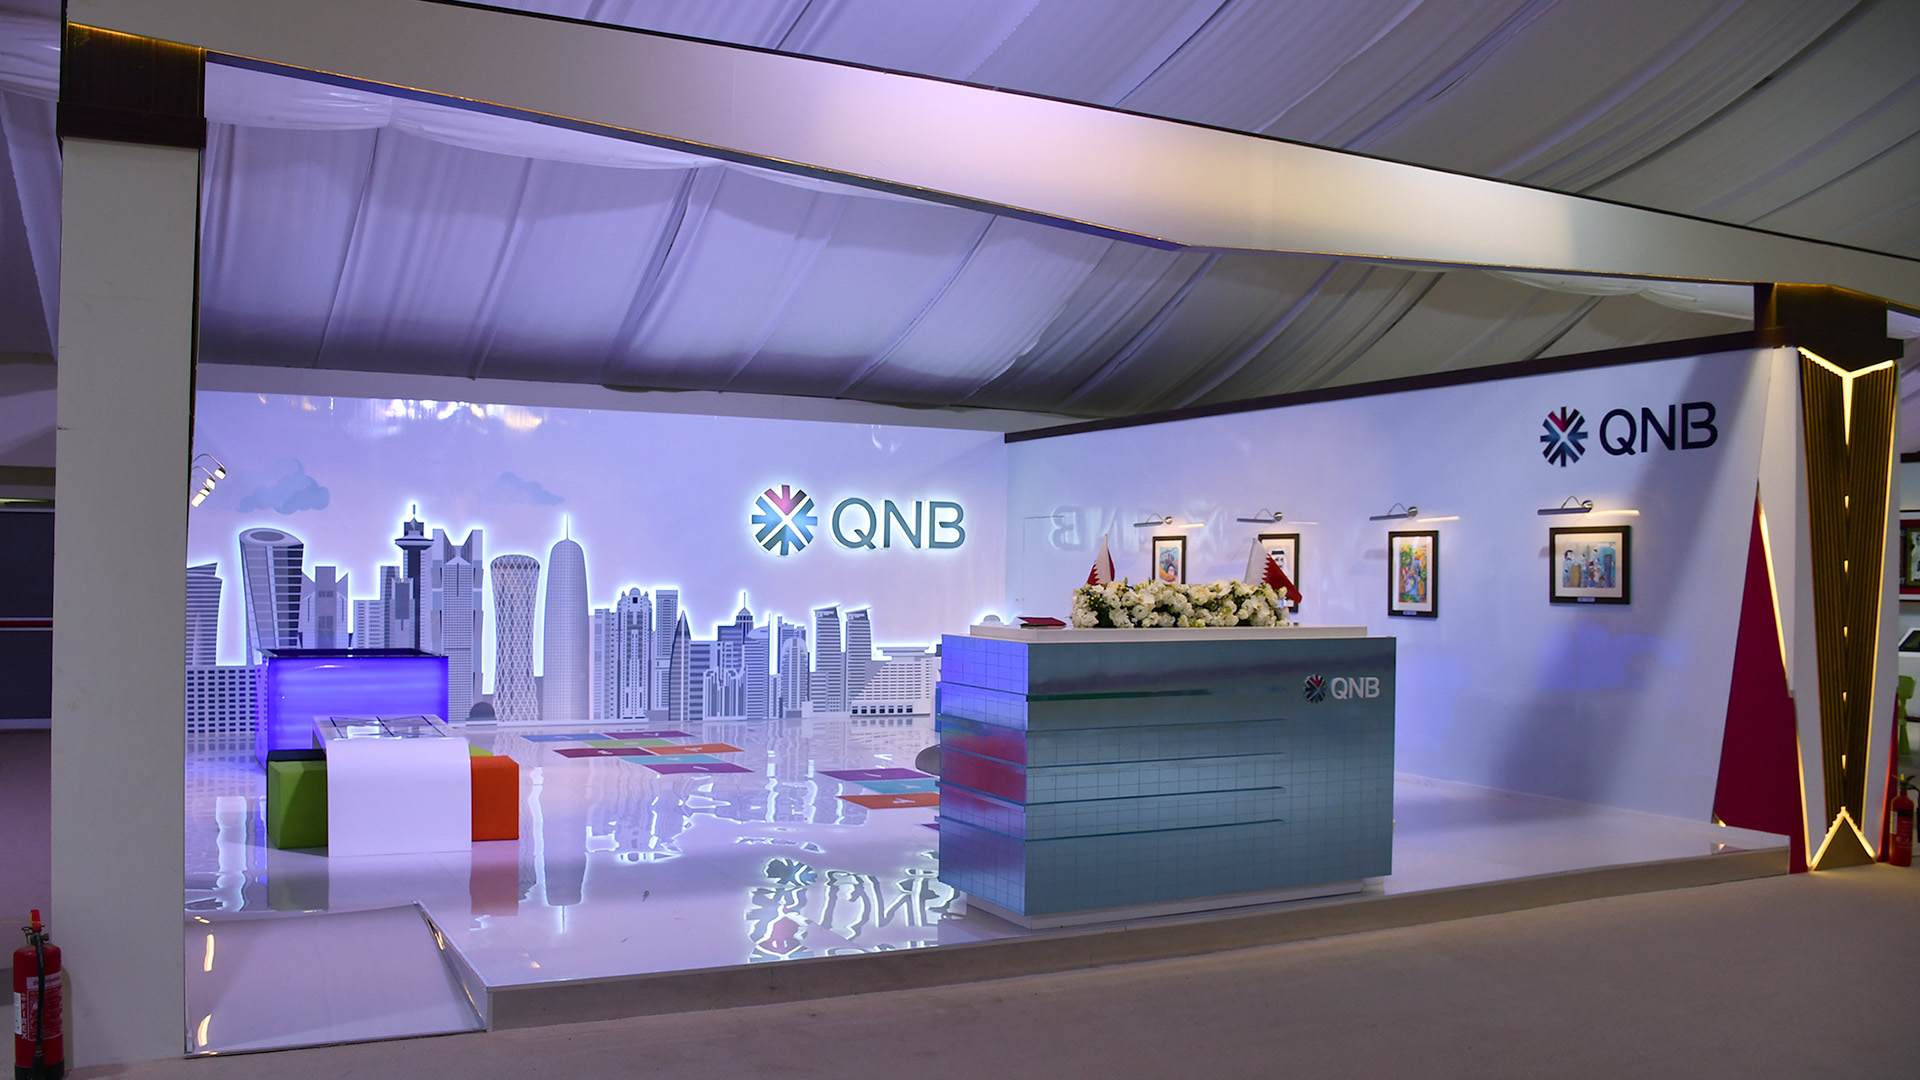 QNB Stand created by ME Visual for National Day 2018 at Darb Al Saai